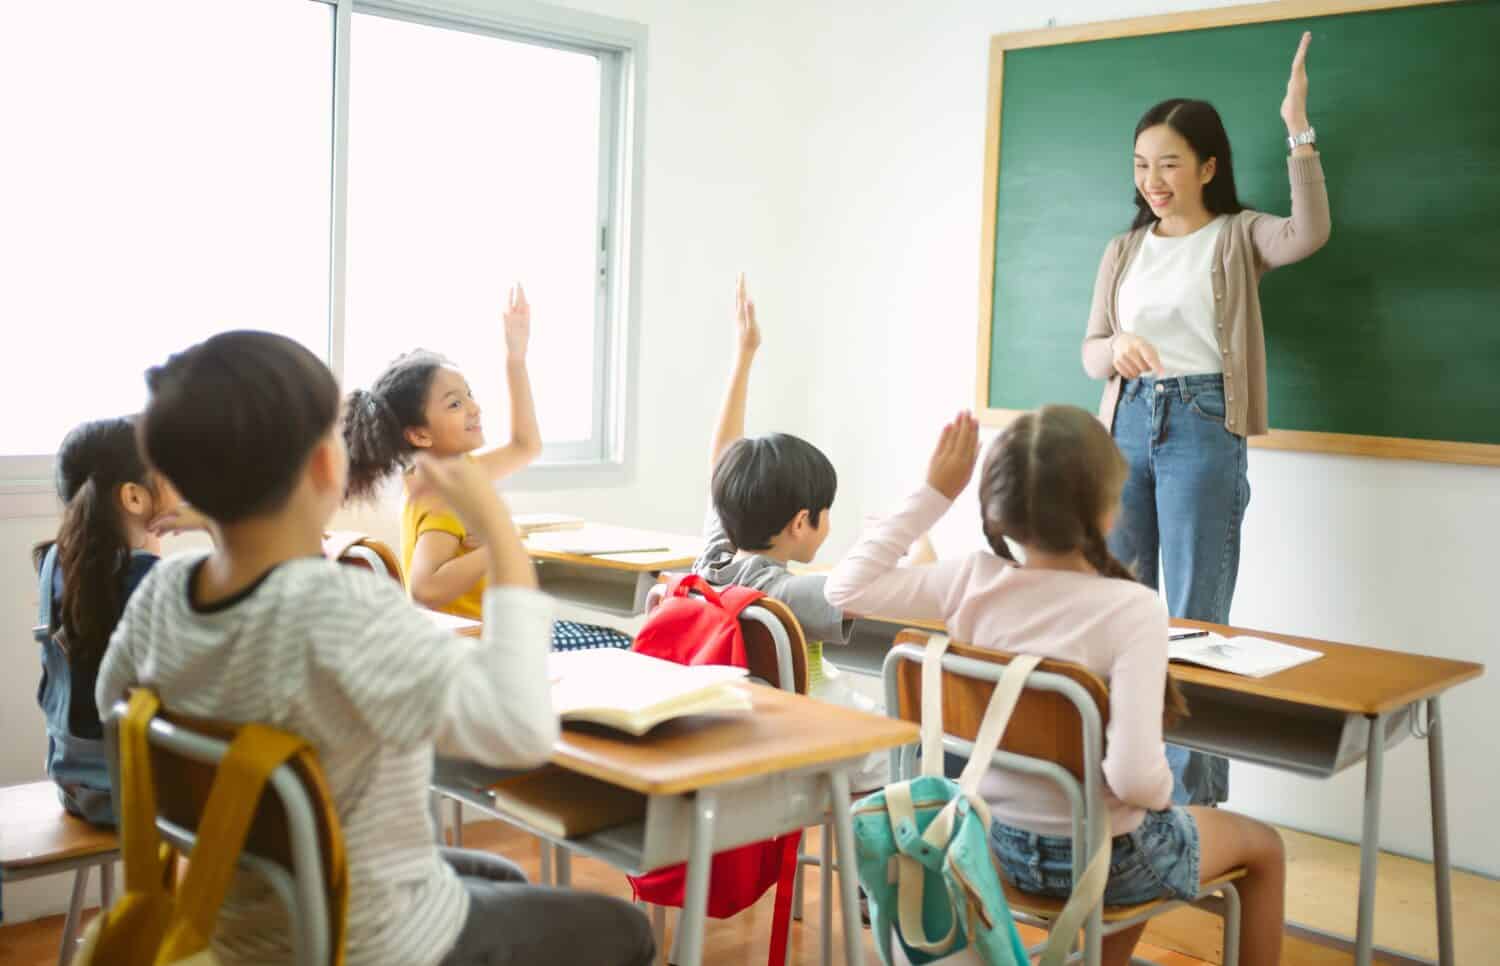 A class teacher encourages her students to raise their hands and answer her question in class.